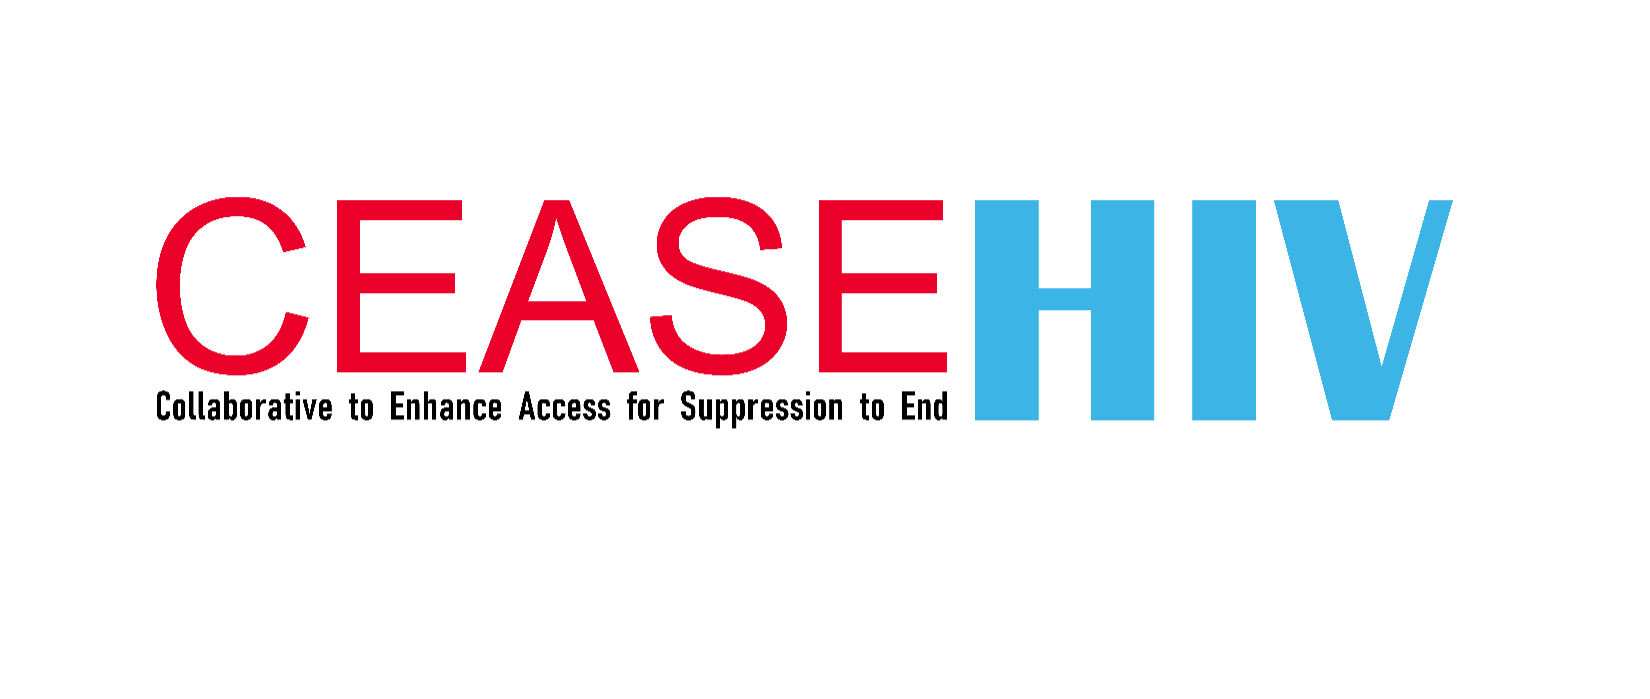 Red and blue logo for CEASE HIV program